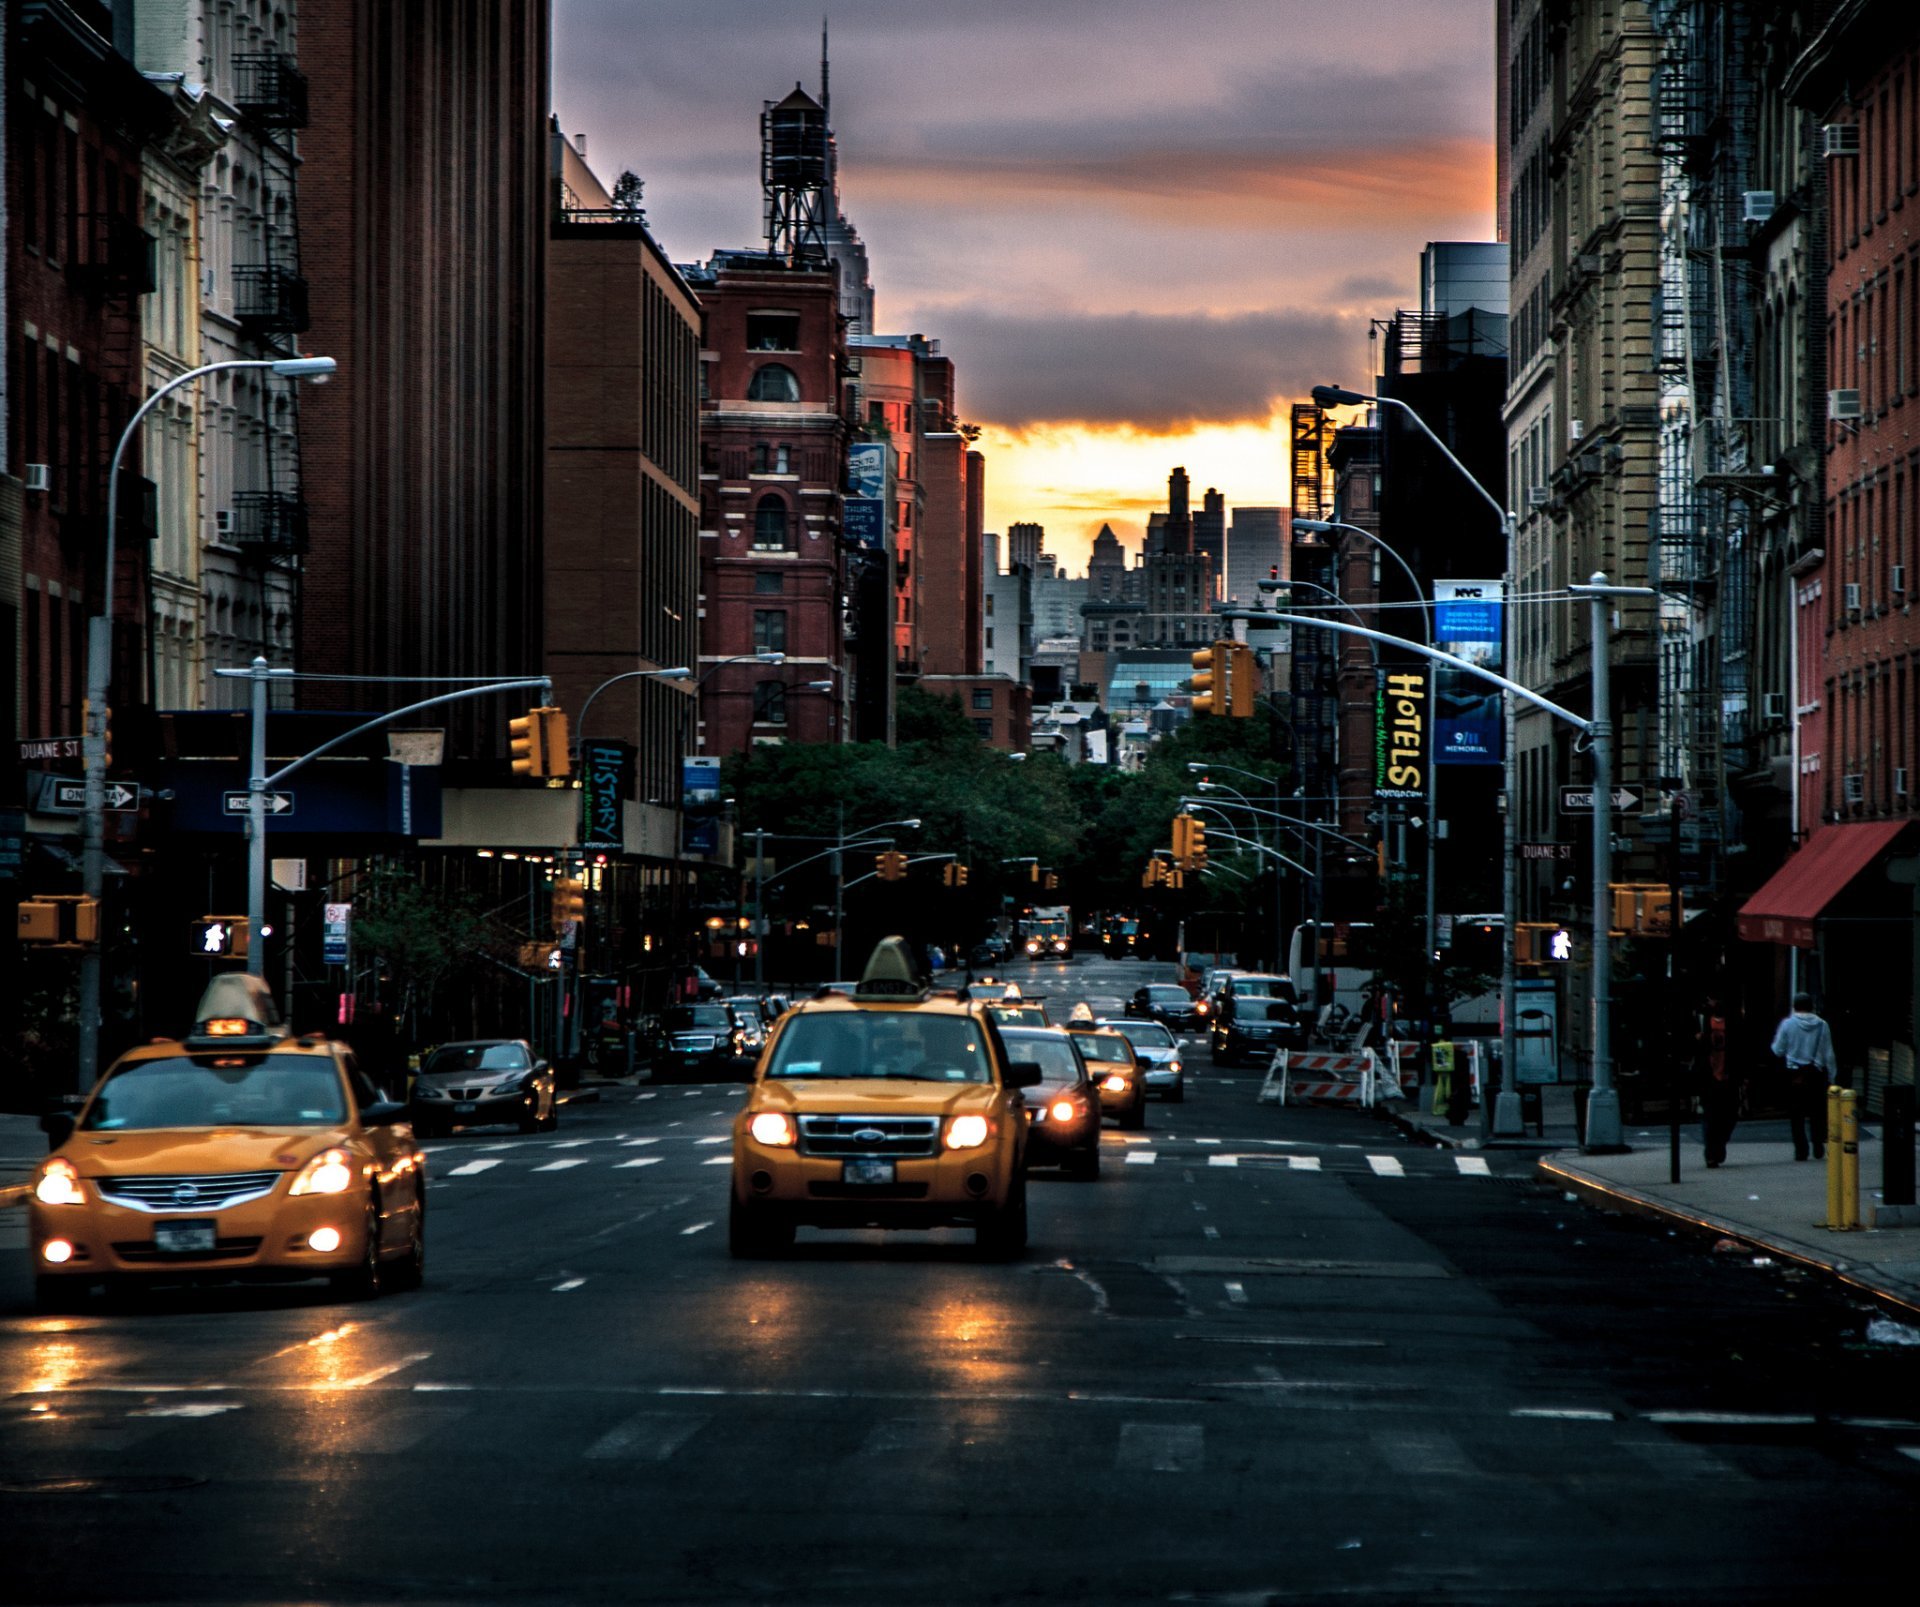 Free download new york street taxi dawn hd wallpaper x for your desktop mobile tablet explore new york street wallpaper new york wallpapers new york wallpaper new york p wallpaper